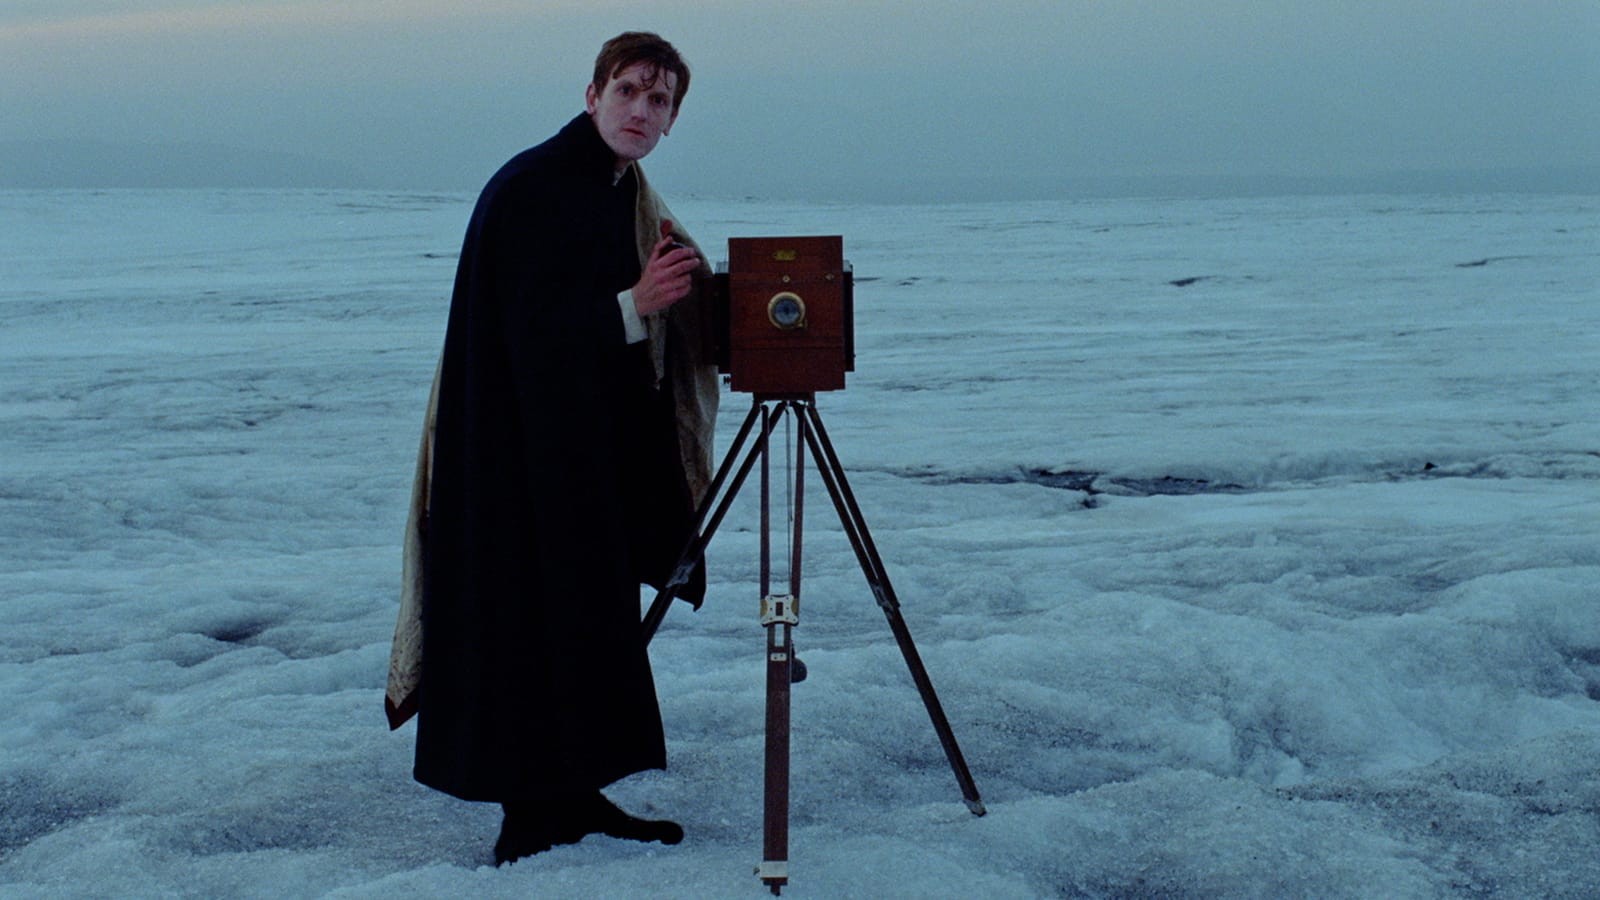 A young man in a cape & boots stands aside an old fashion camera, on a large, desolate ice field.